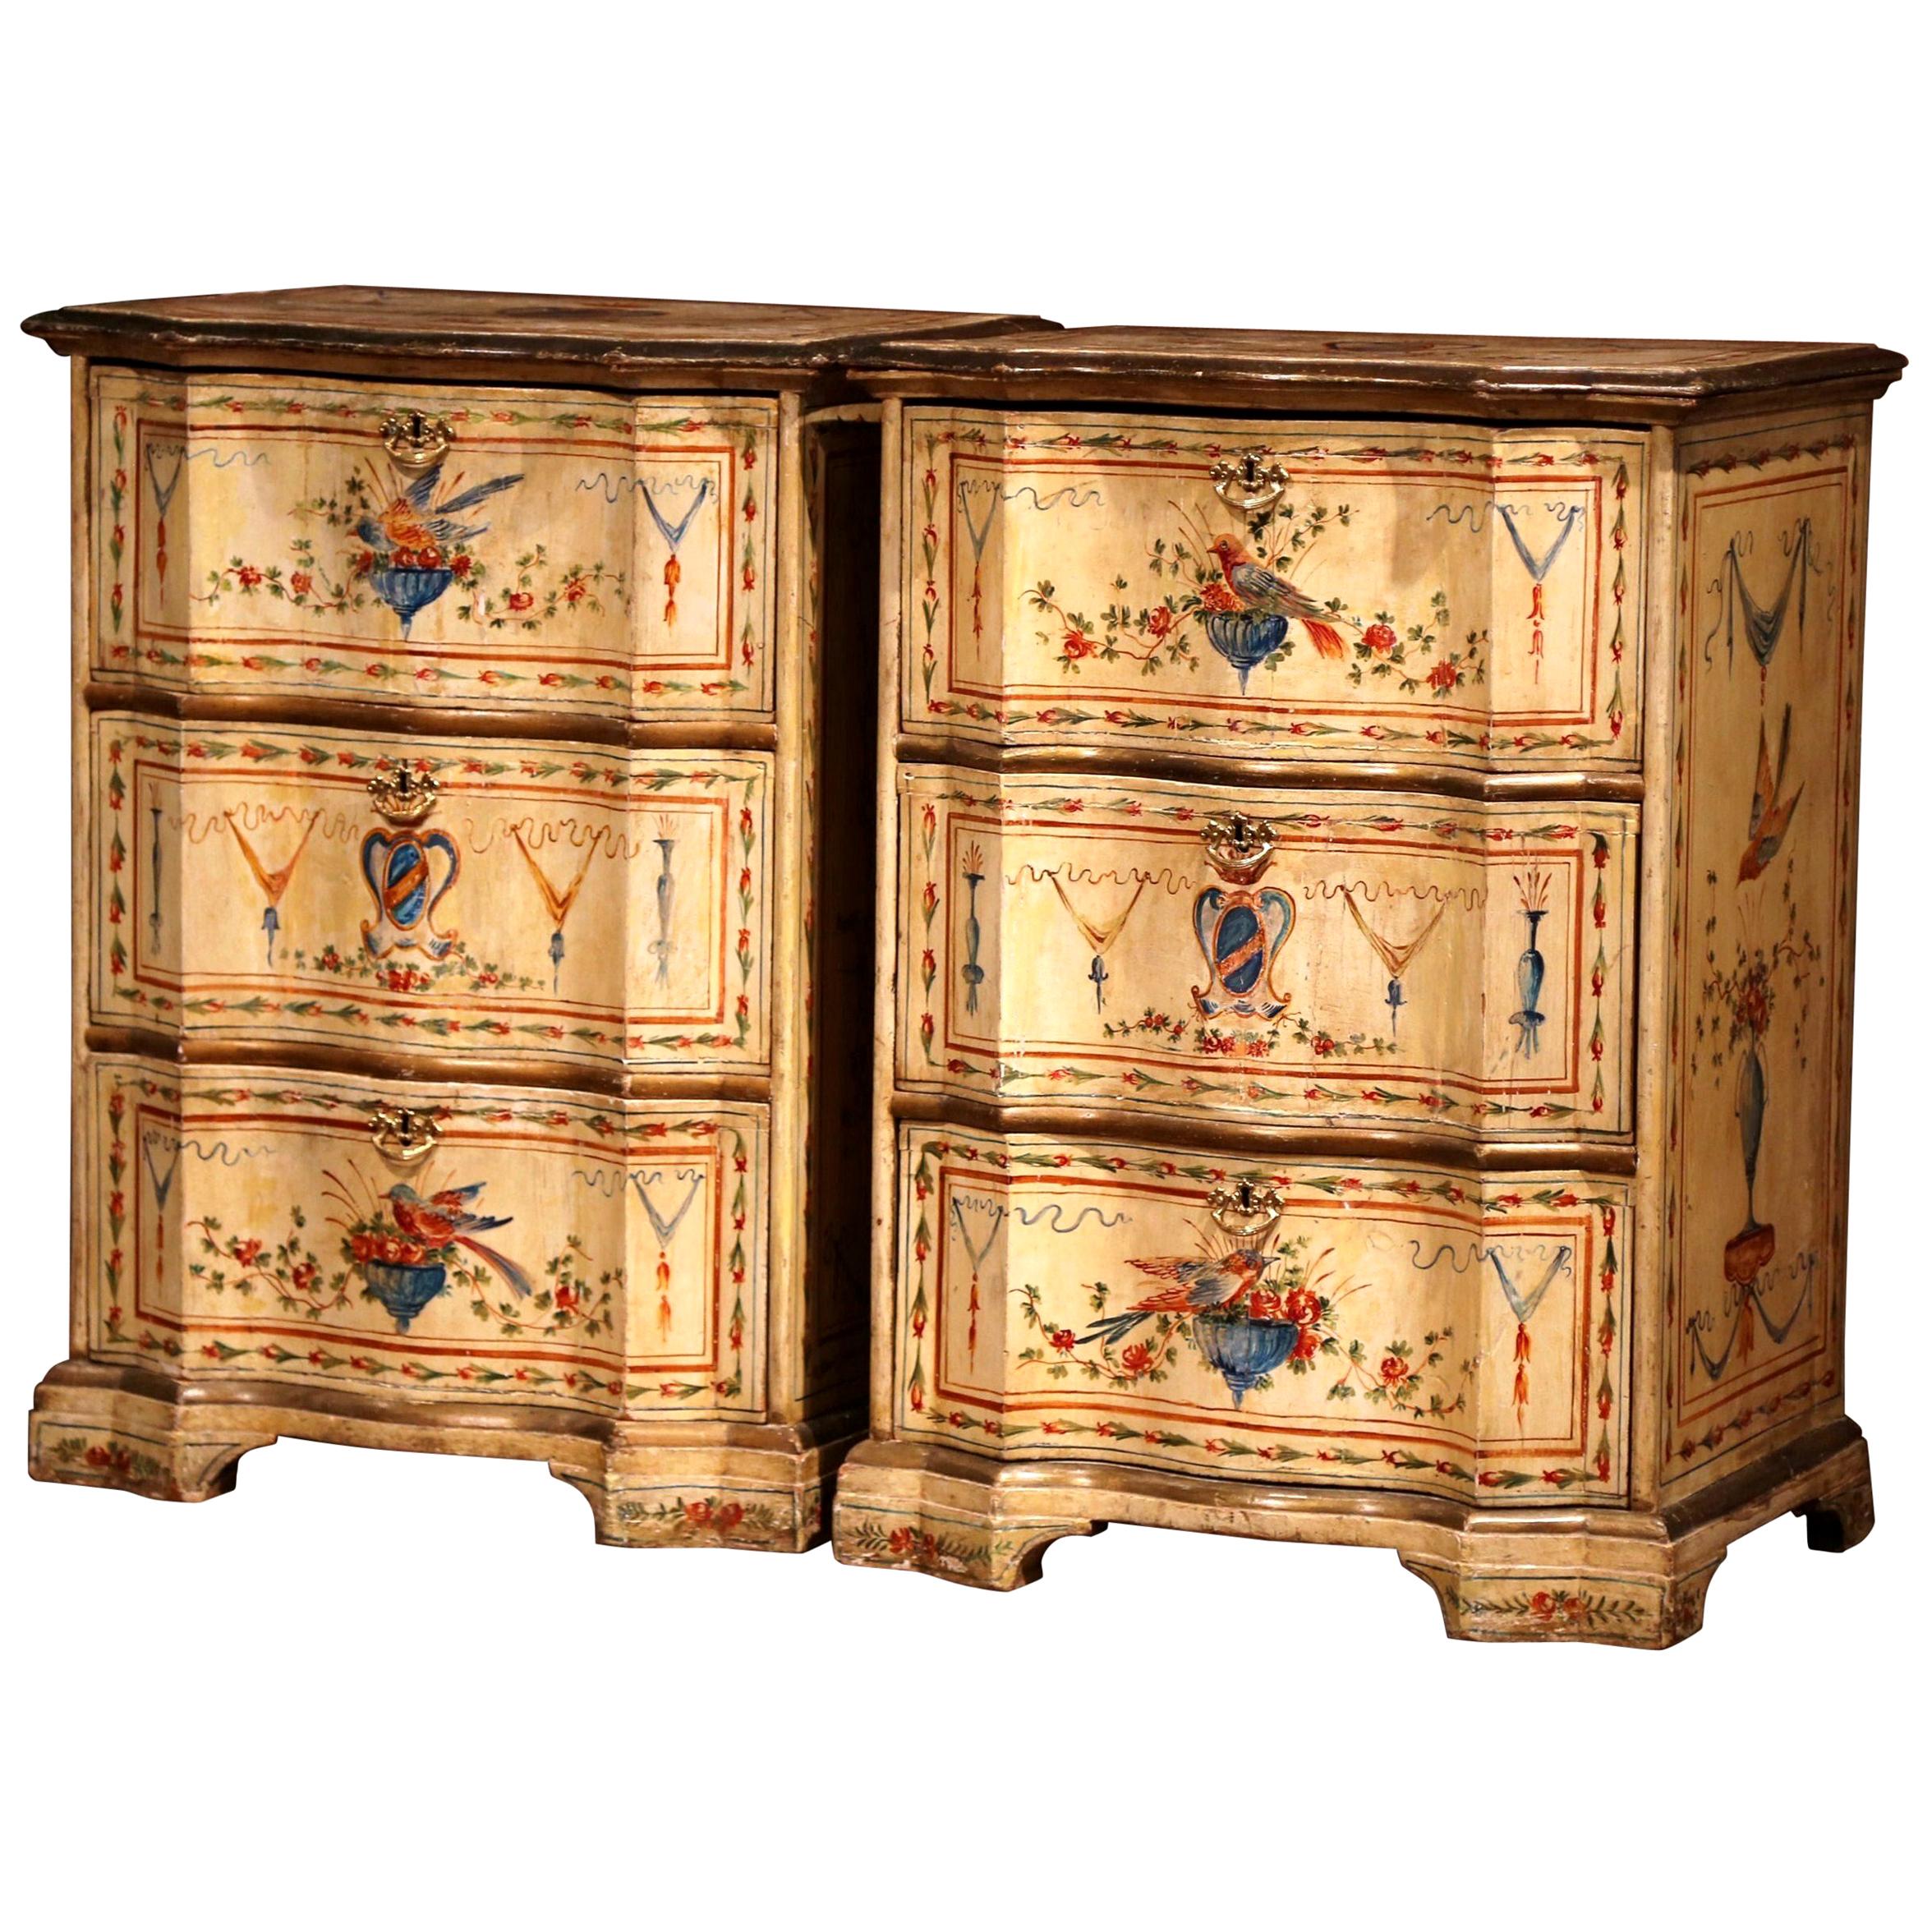 Pair of 19th Century Italian Carved Painted Chests of Drawers with Bird Decor